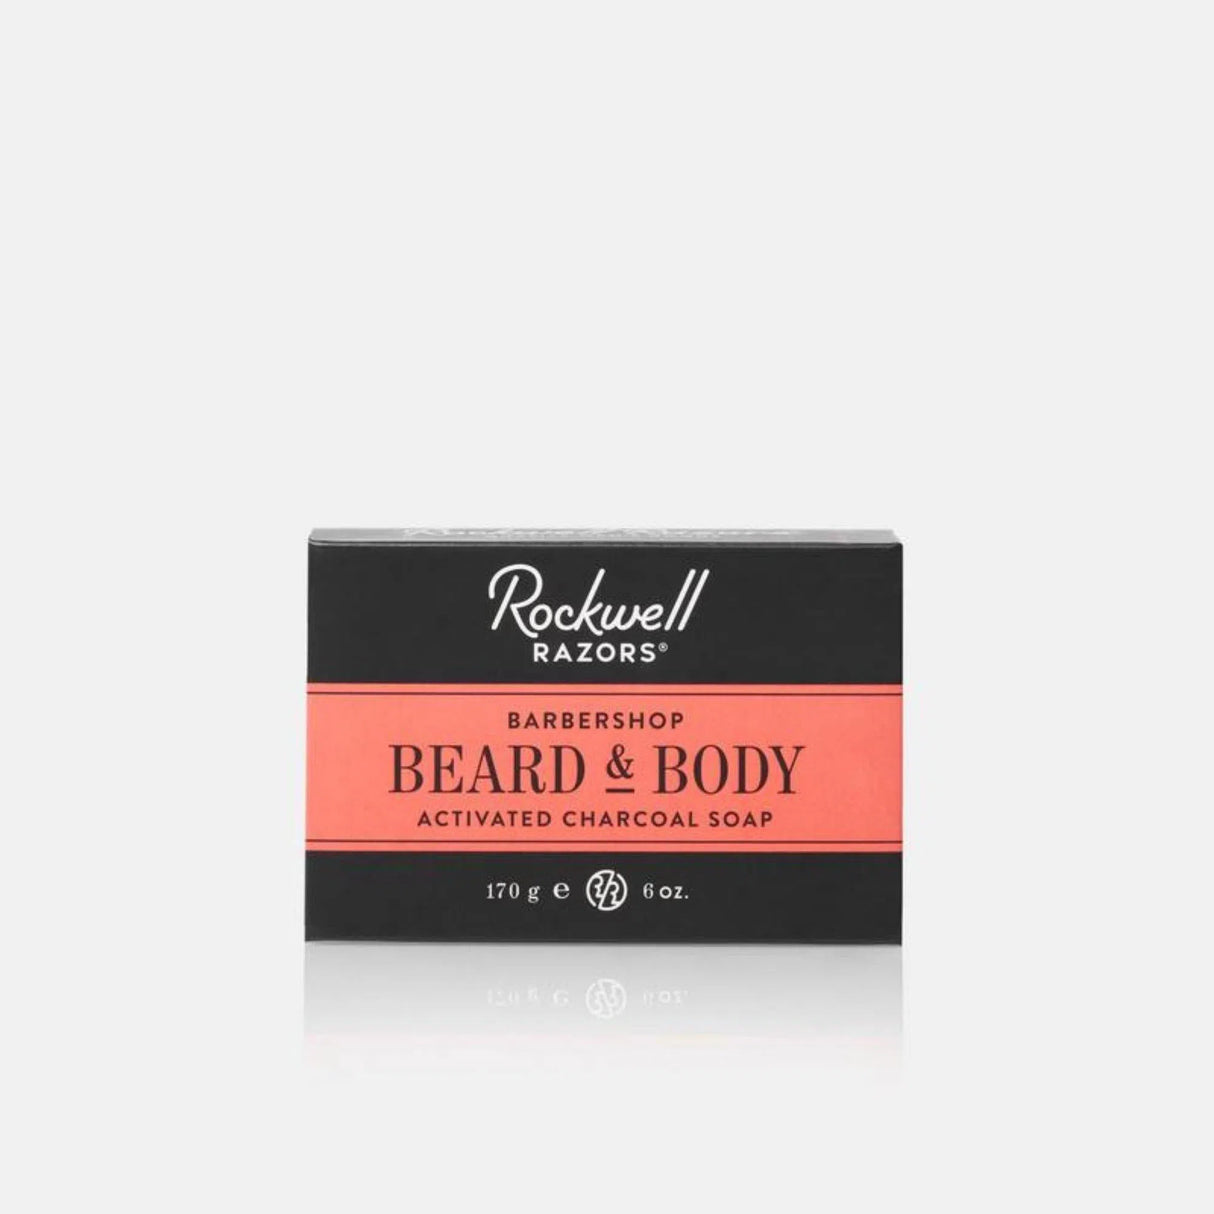 Beard & Body Activated Charcoal Soap